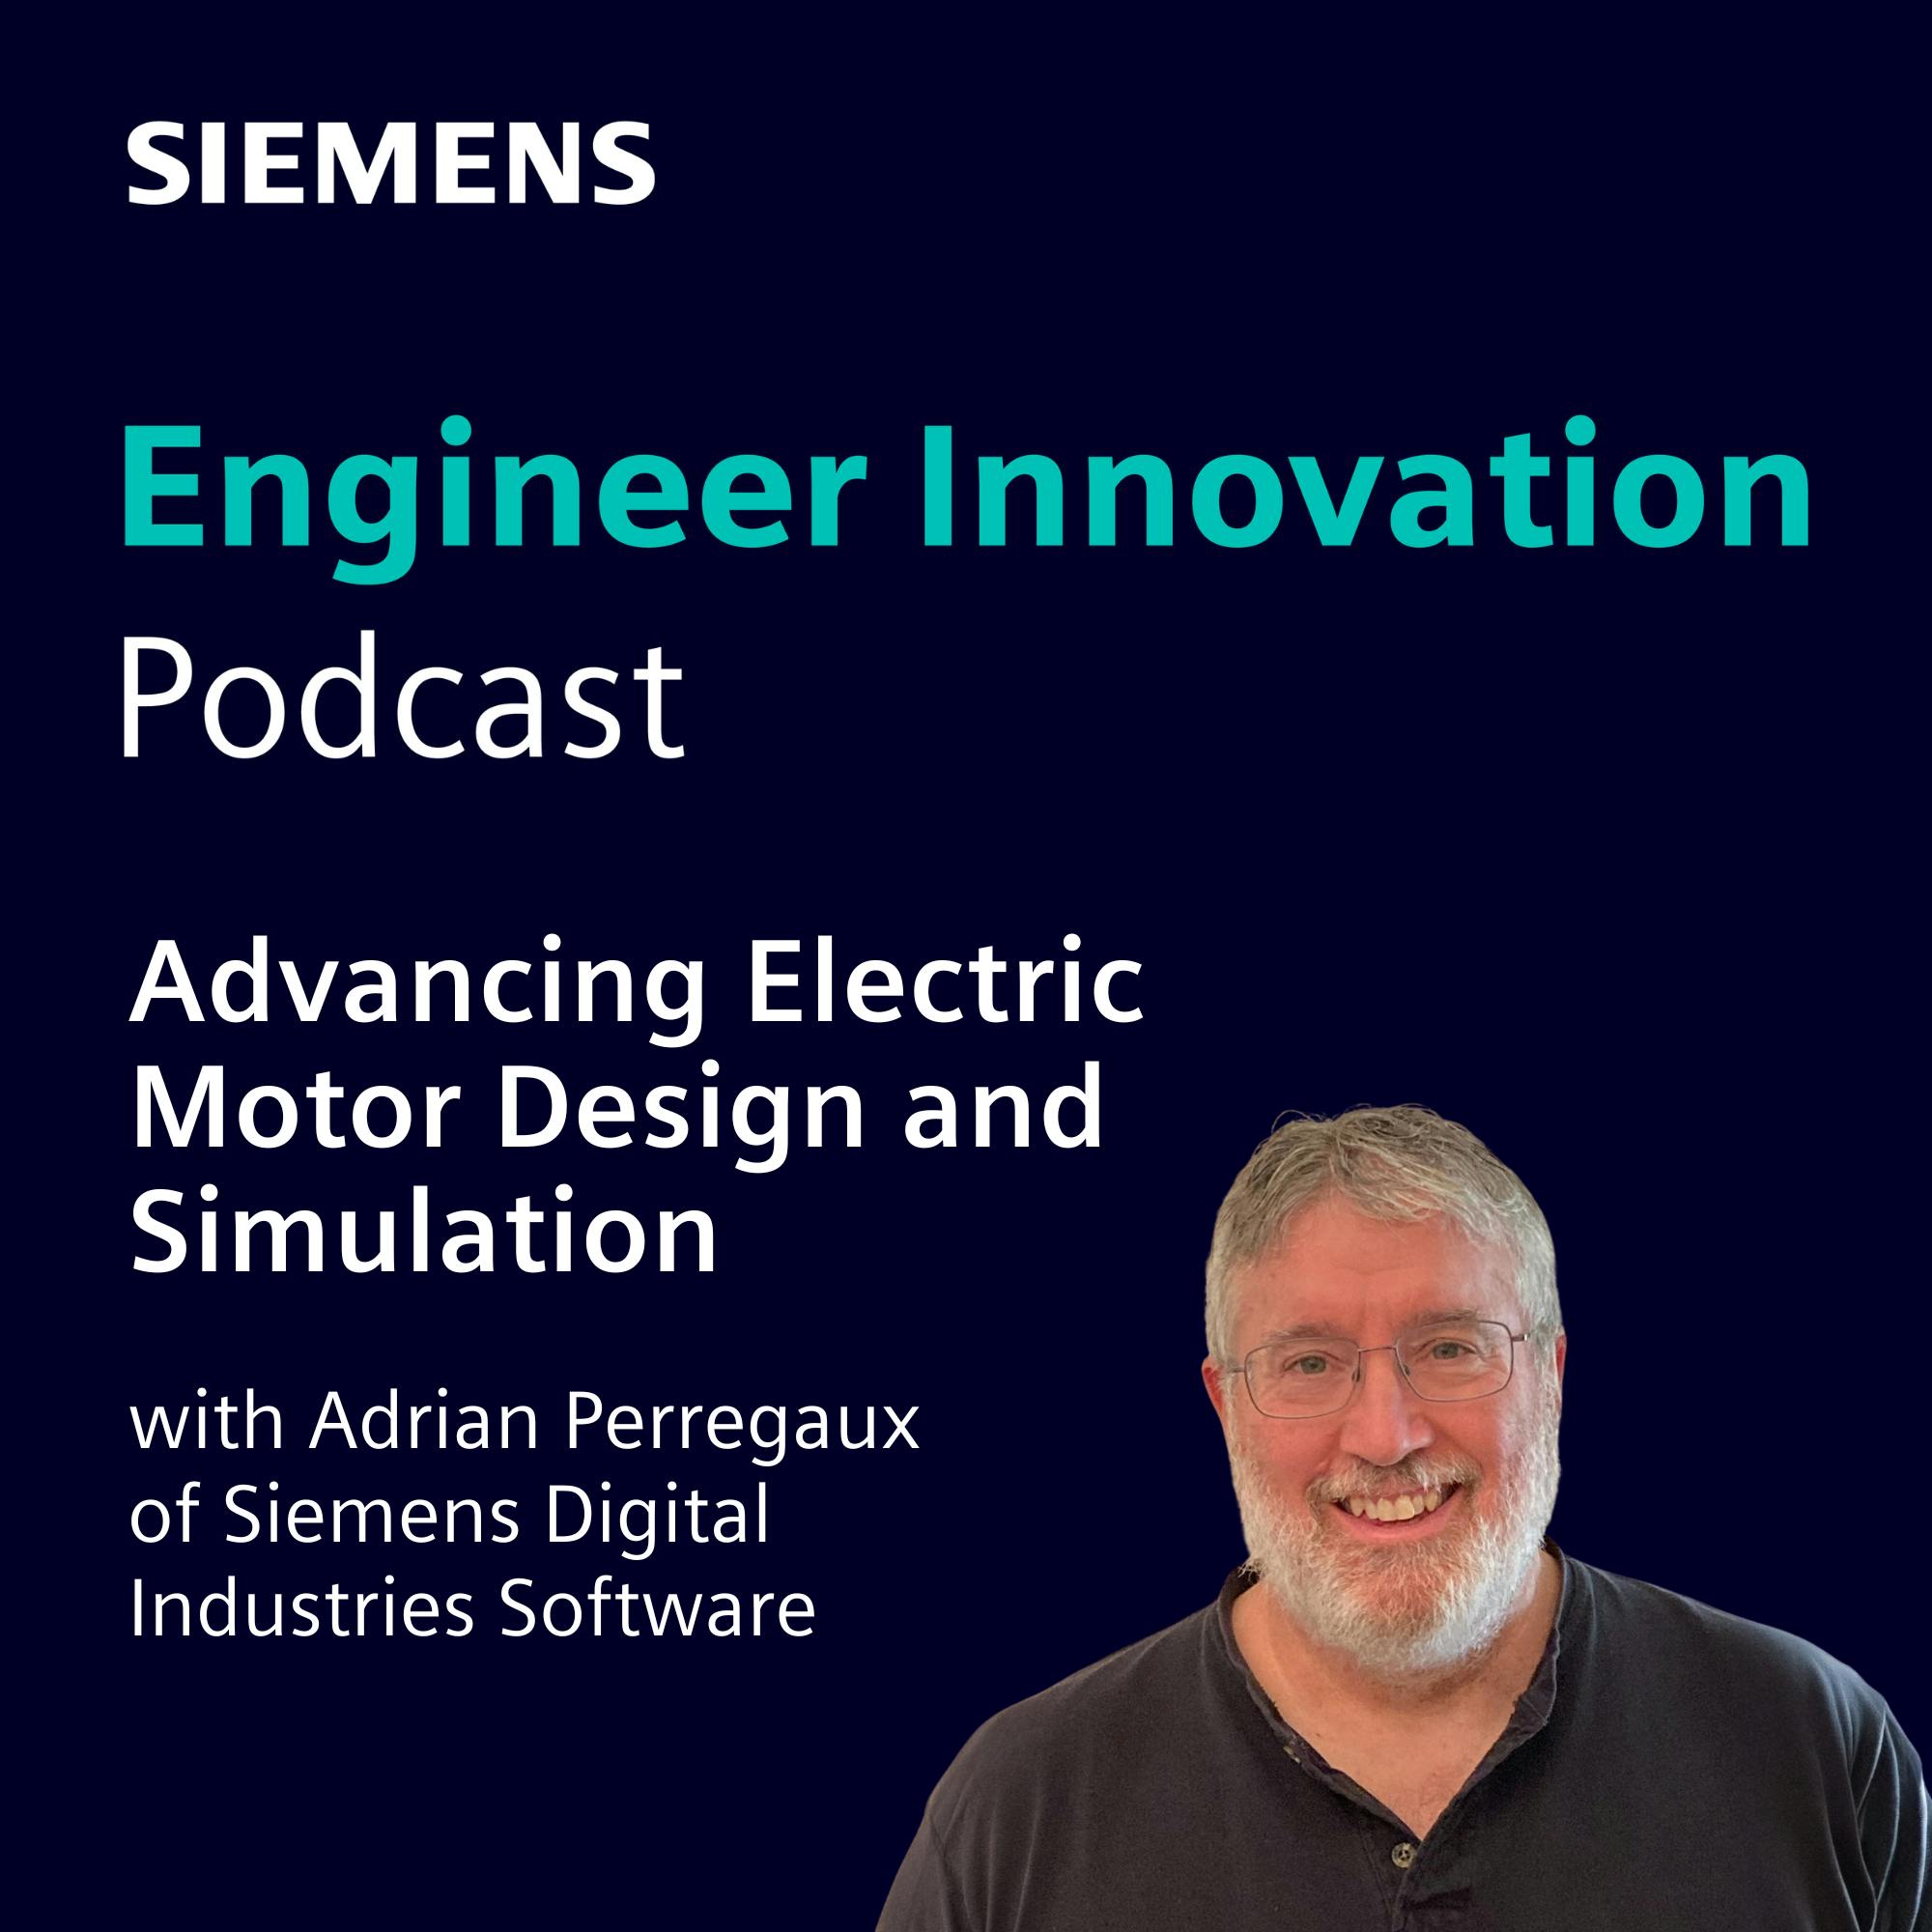 Advancing Electric Motor Design and Simulation with Adrian Perregaux of Siemens